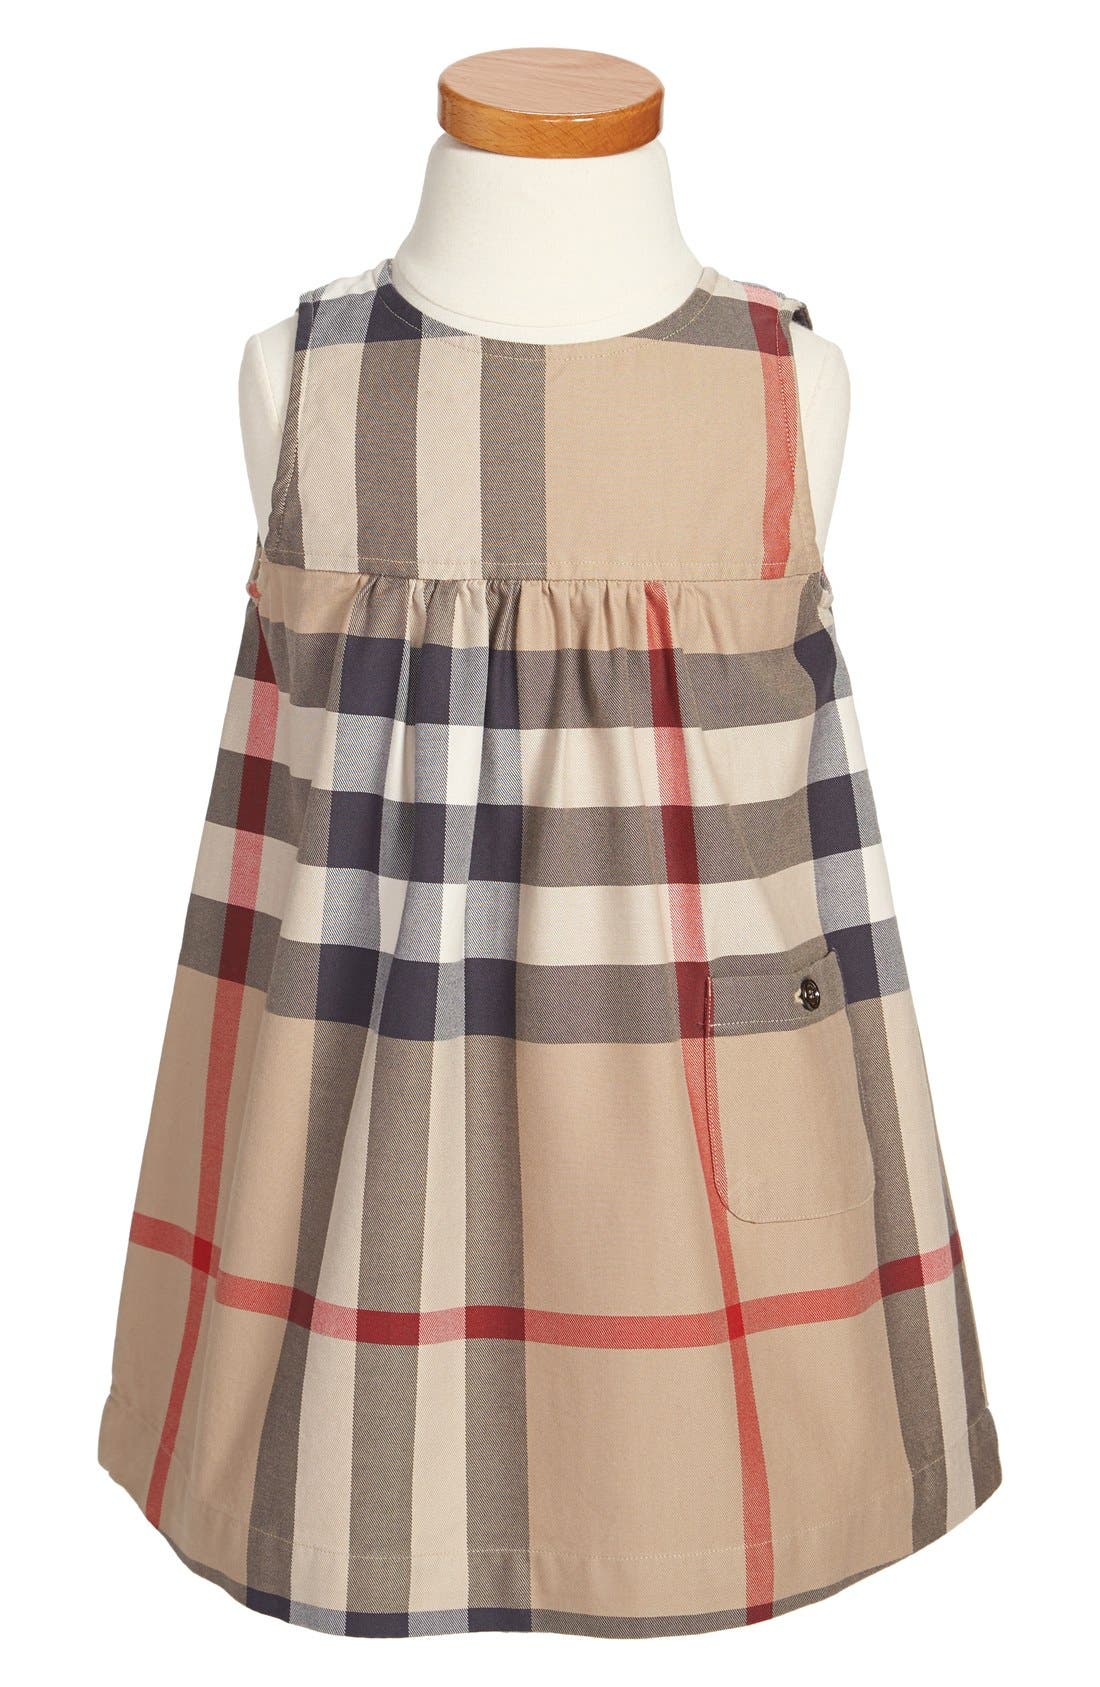 burberry girl outfits